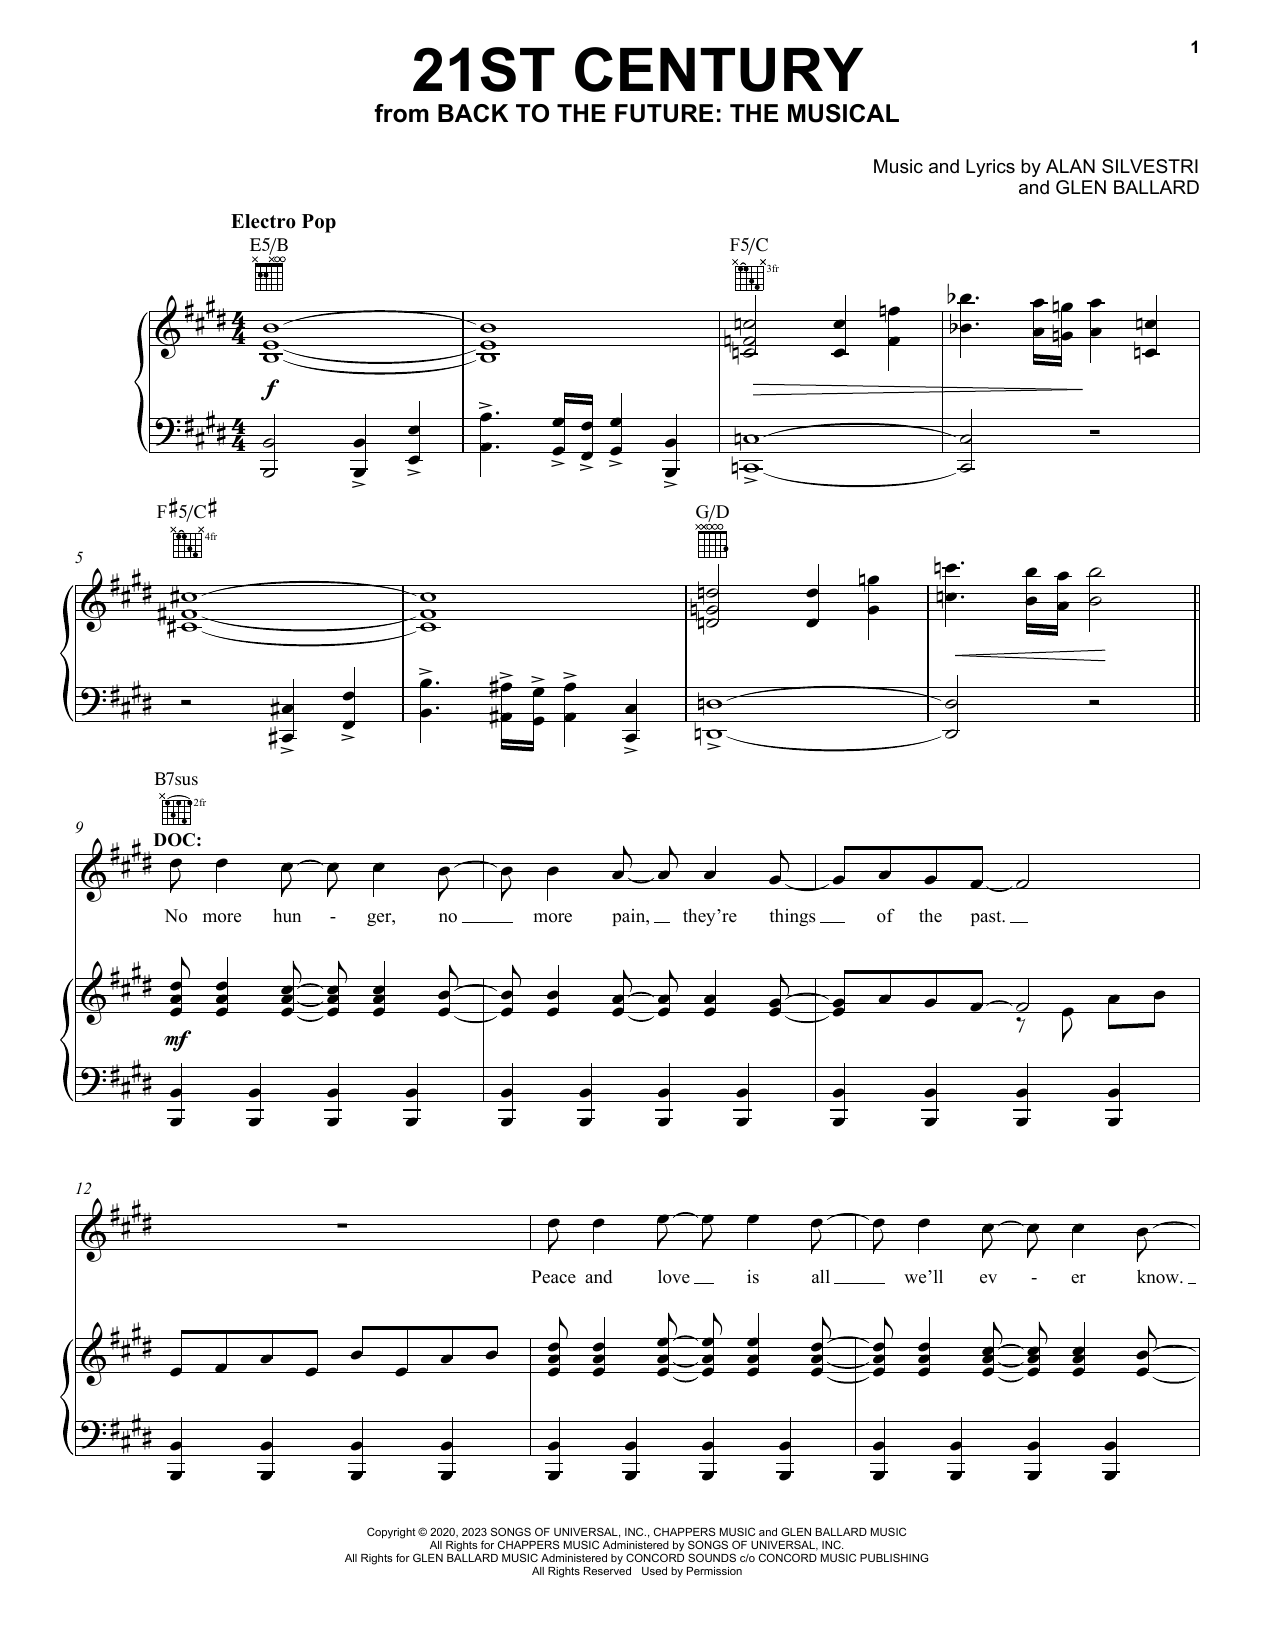 Download Glen Ballard and Alan Silvestri 21st Century (from Back To The Future: Sheet Music